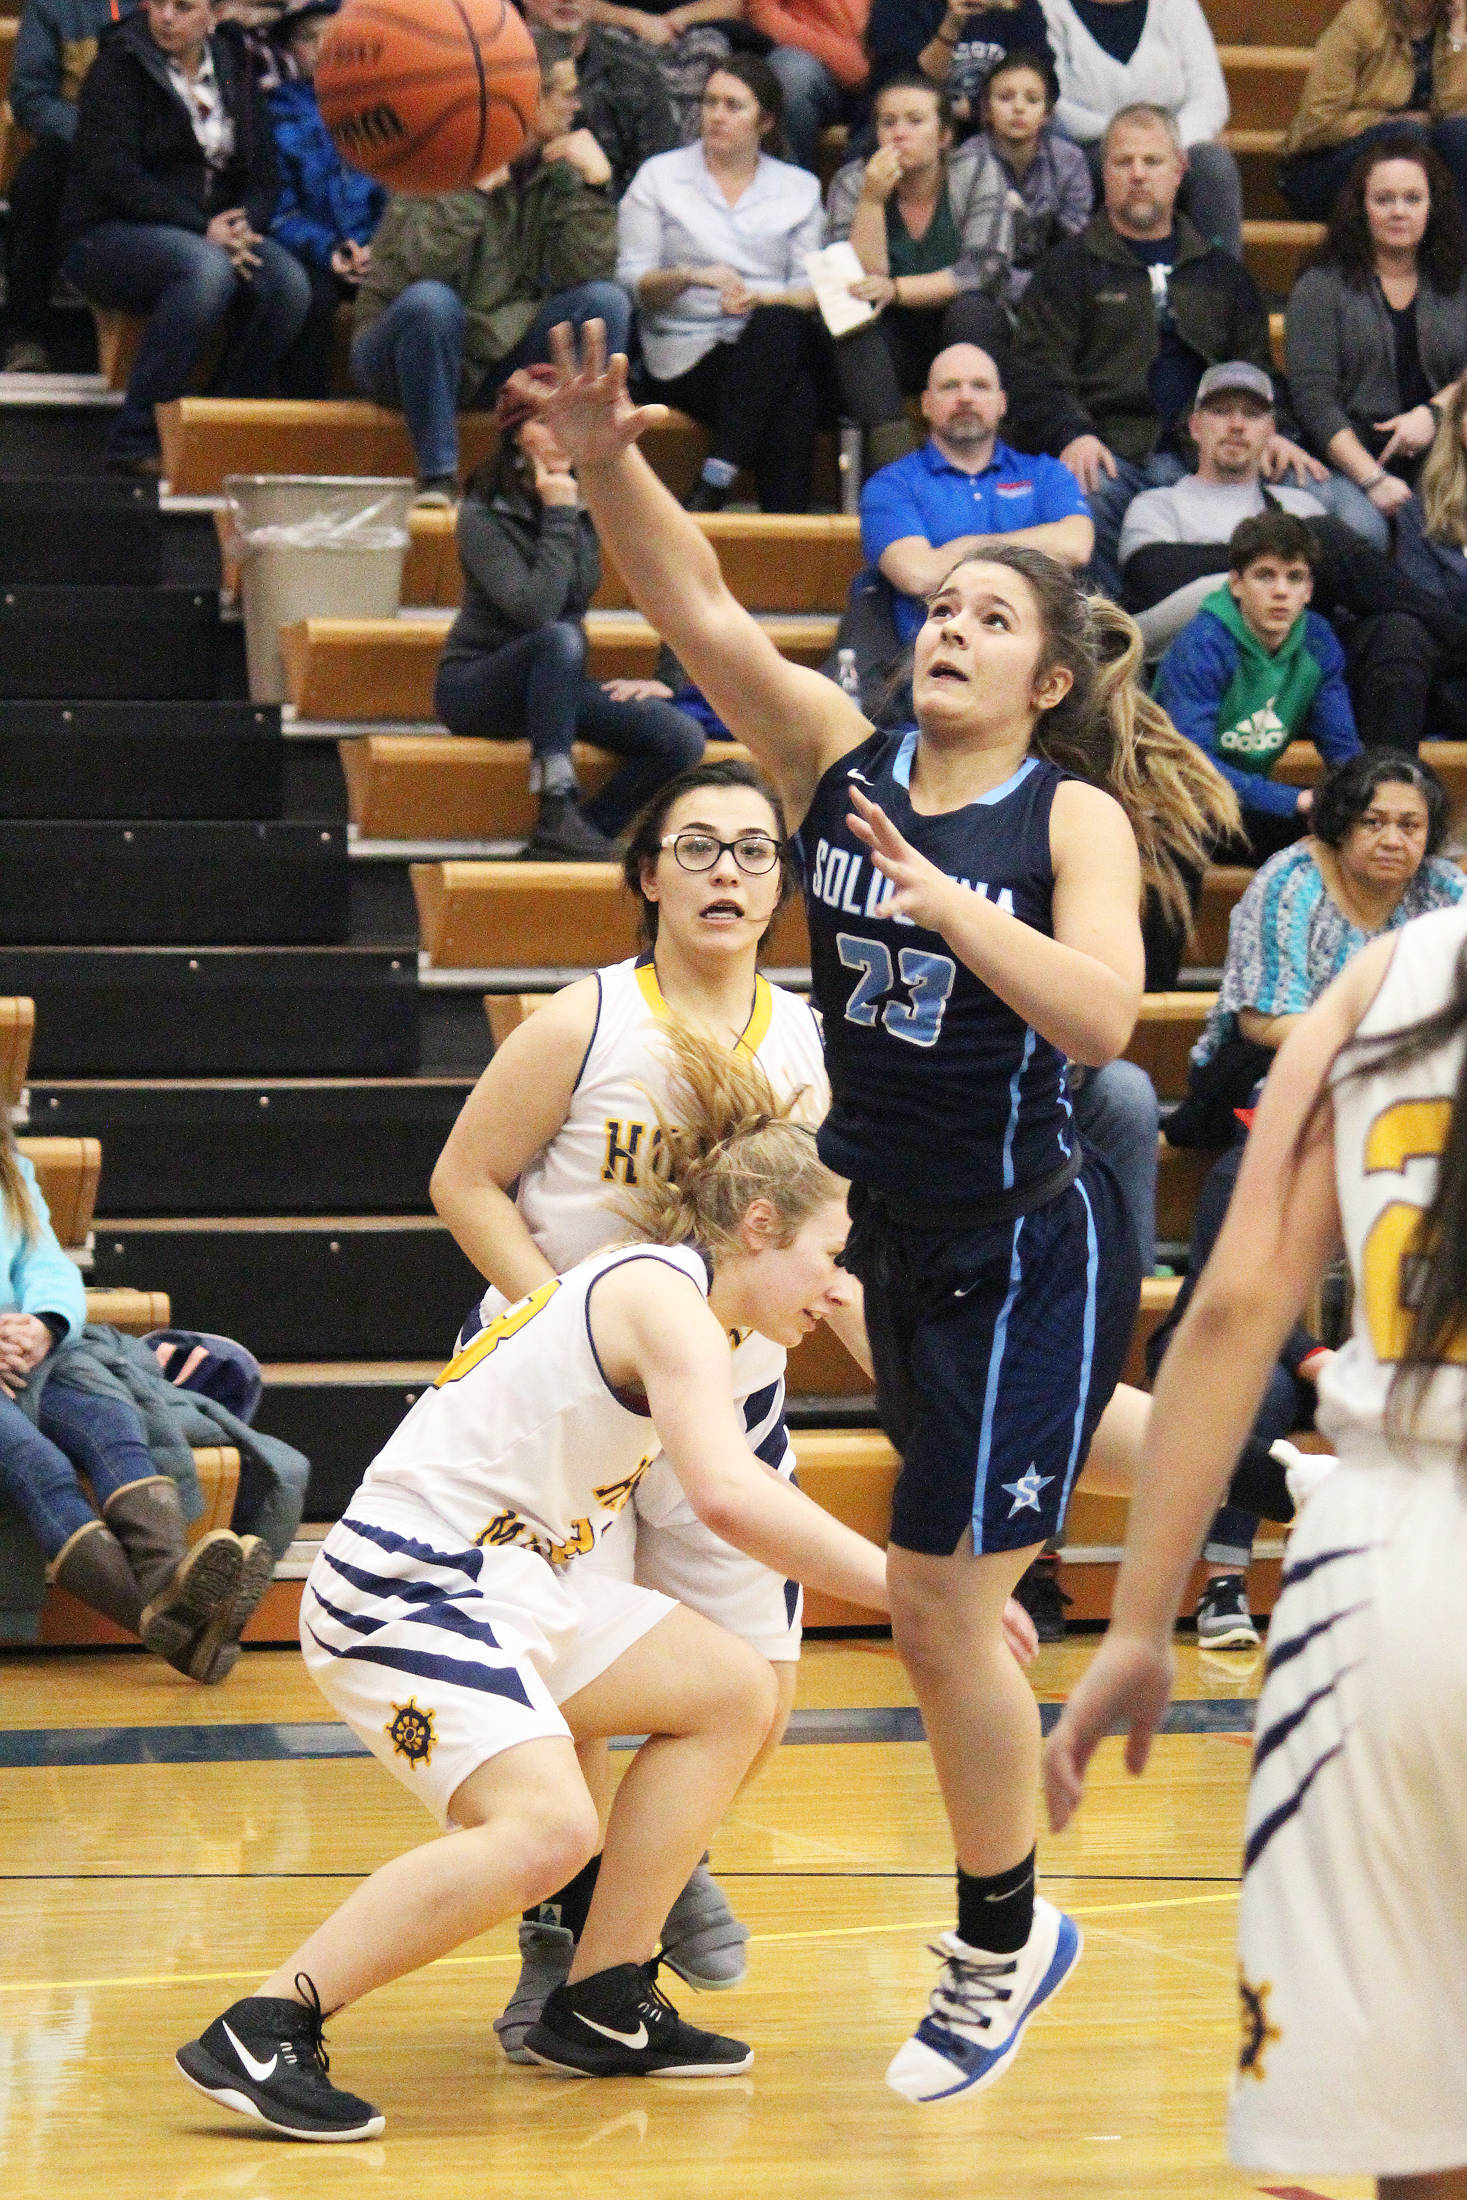 Soldotna High School’s Mikayla Leadens takes a shot at Homer’s basket during a Tuesday, Jan. 15, 2019 game in Homer, Alaska. (Photo by Megan Pacer/Homer News)